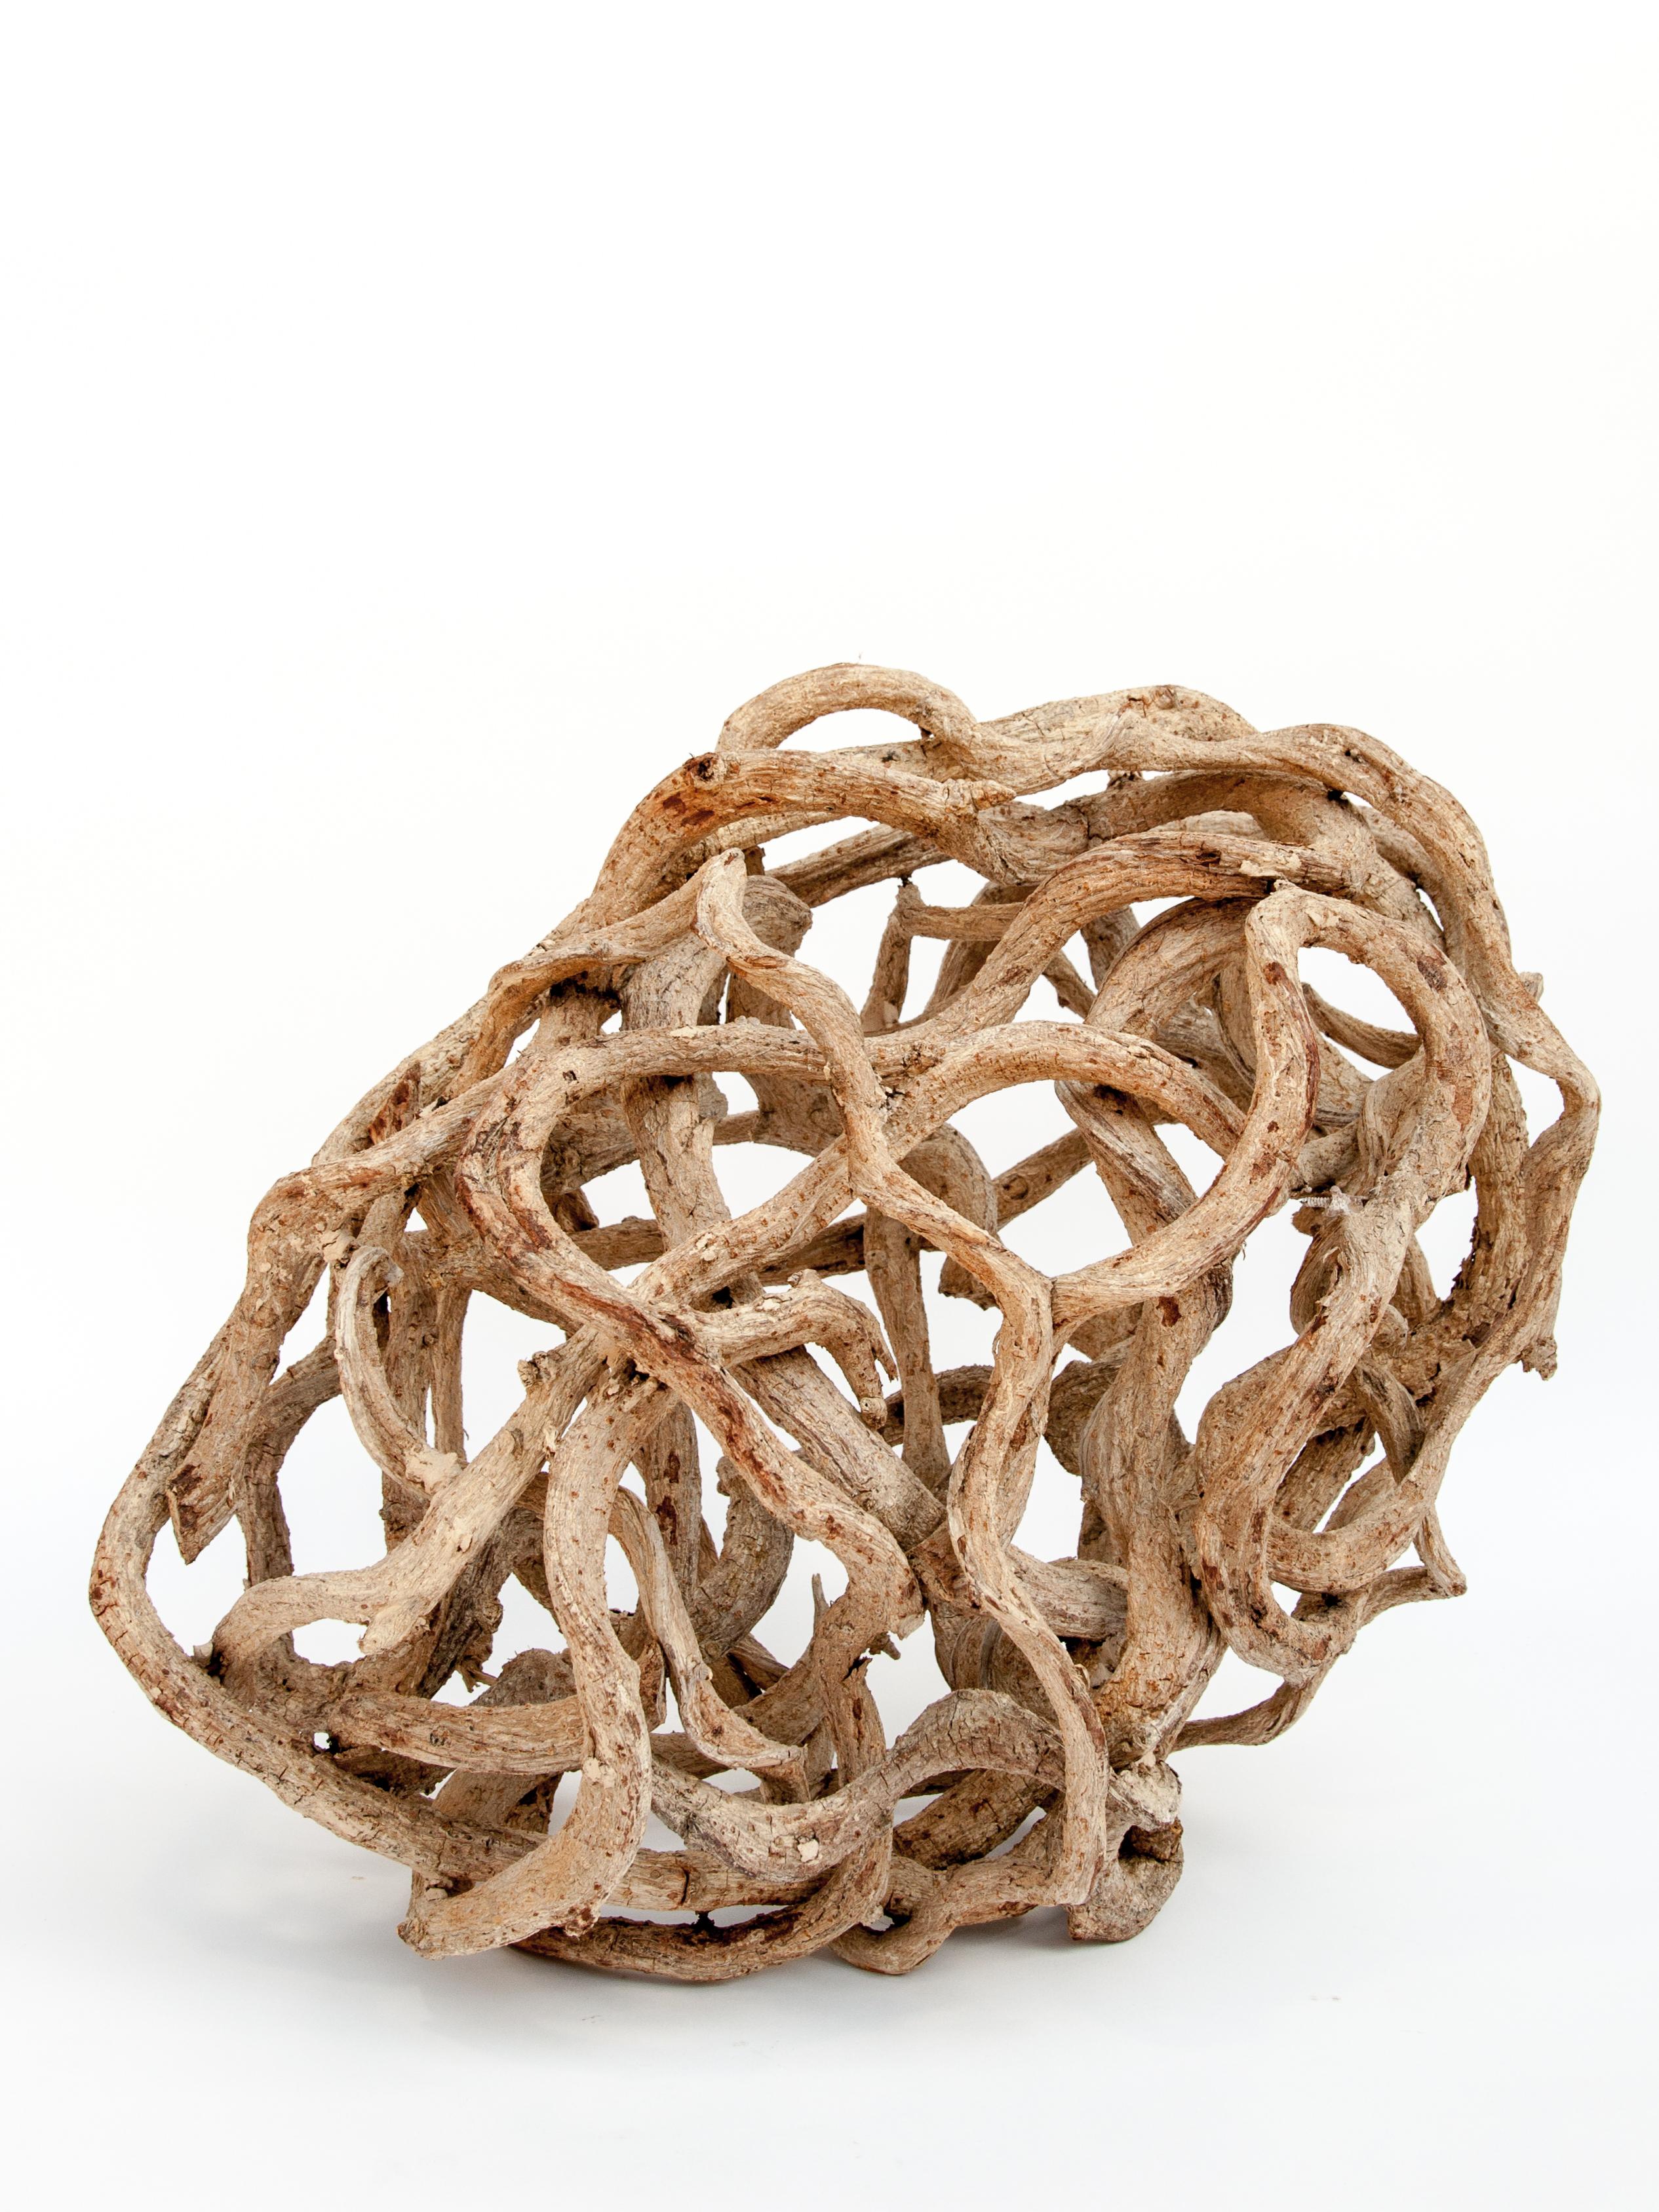 Rustic Liana Vine Organic Sculpture in Ovoid Shape, from Thailand